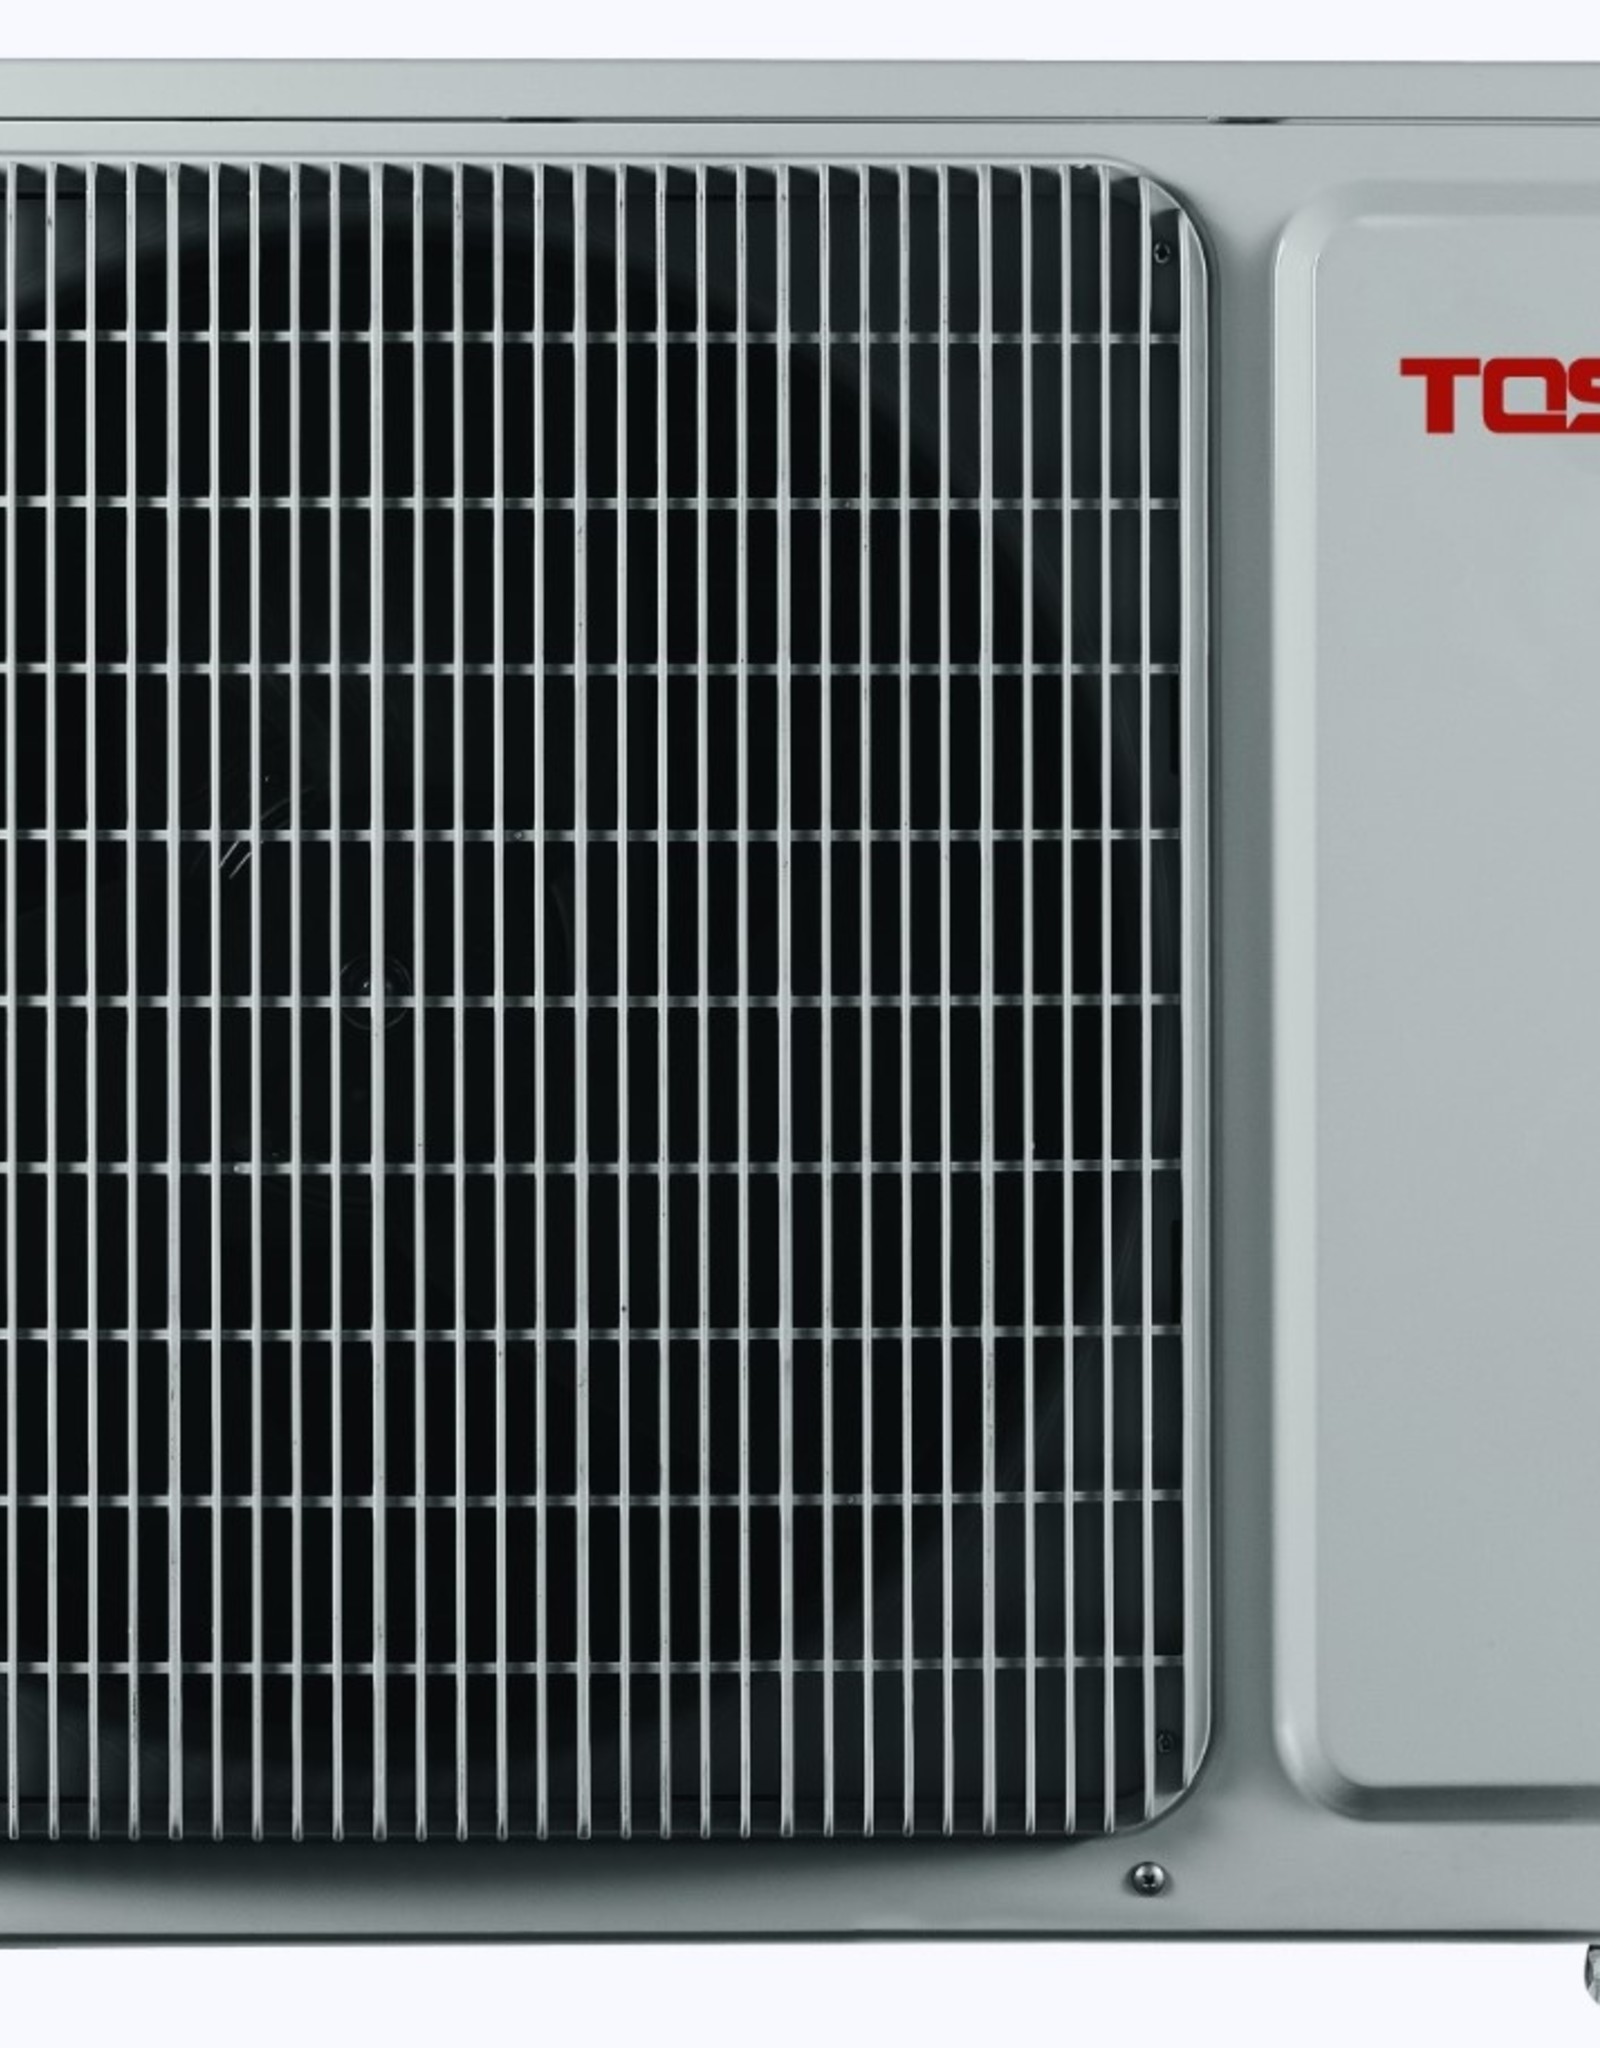 Tosot TOSOT BORA 2,5kW R32 inverter set by GREE